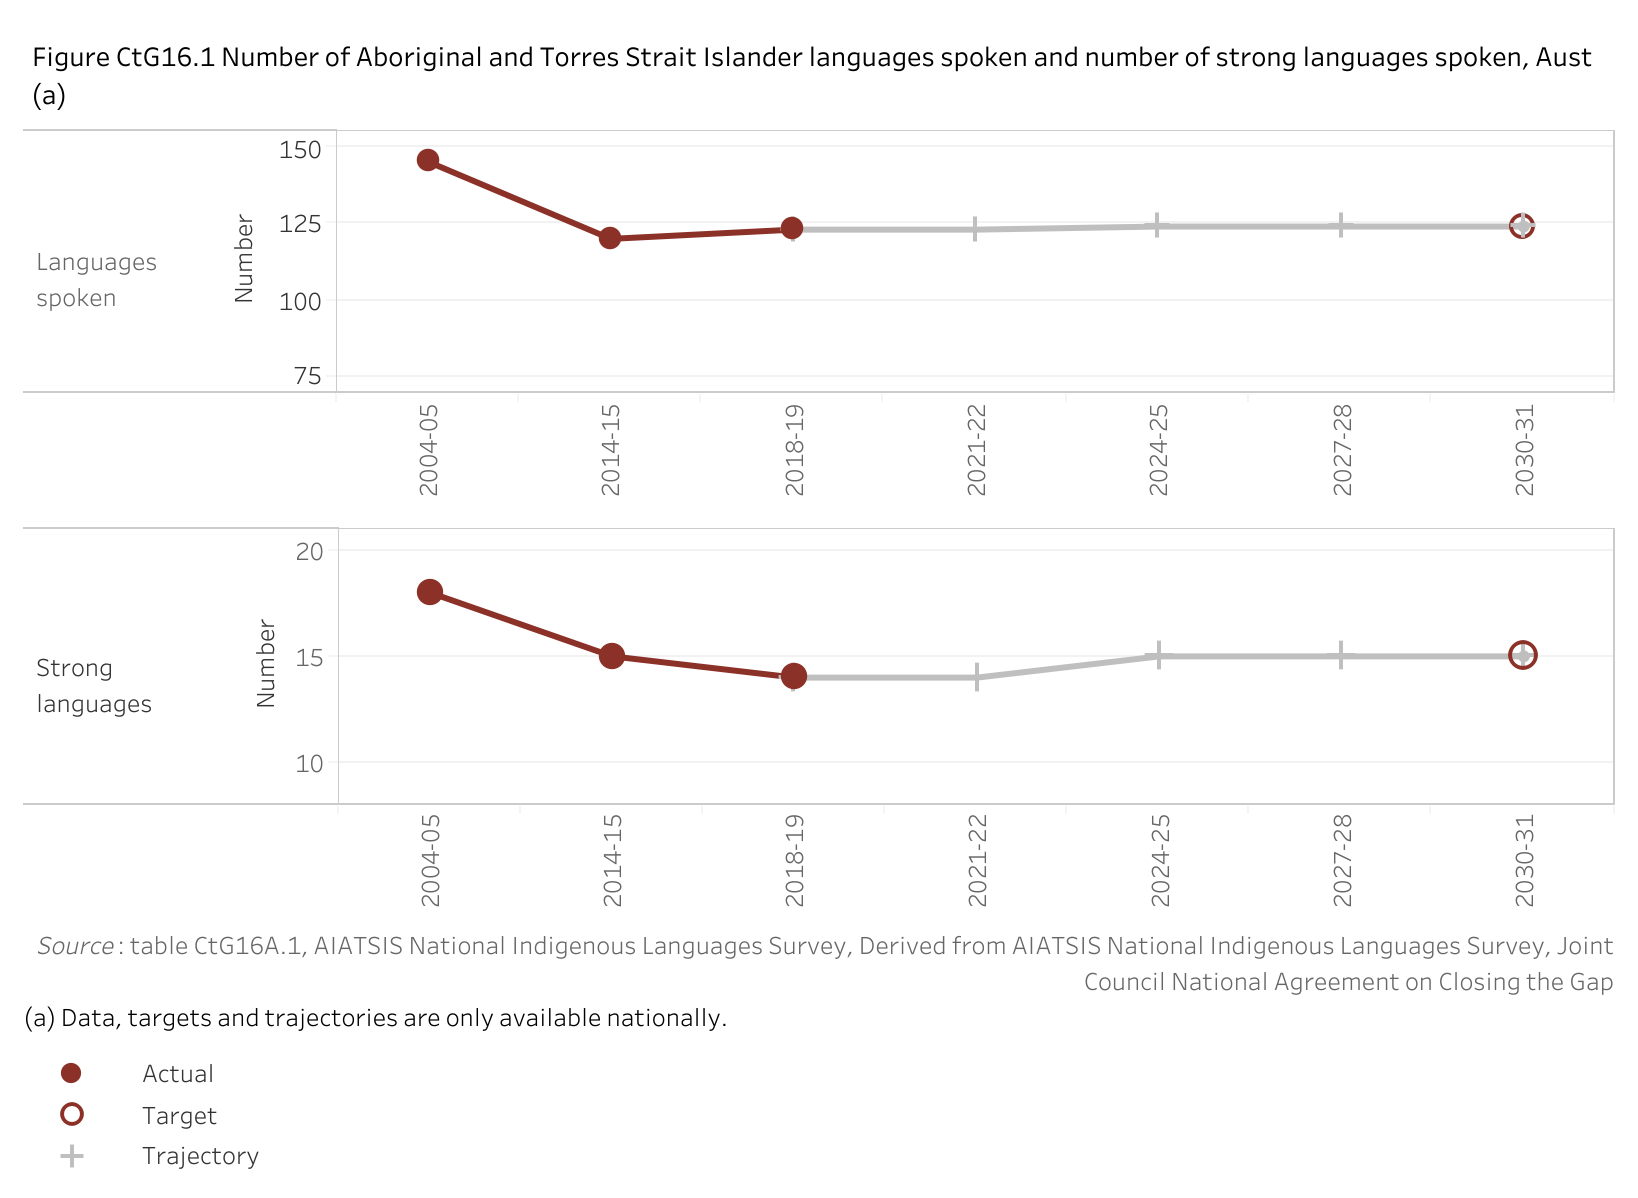 Figure CtG16.1. Line charts showing the number of Aboriginal and Torres Strait Islander languages spoken and the number that are considered strong. The aim under Closing the Gap is for a sustained increase in both by 2031. With the 2018-19 baseline value of 123 languages (14 strong), this means an increase to a target value of 124 languages spoken (15 strong) by 2030-31.